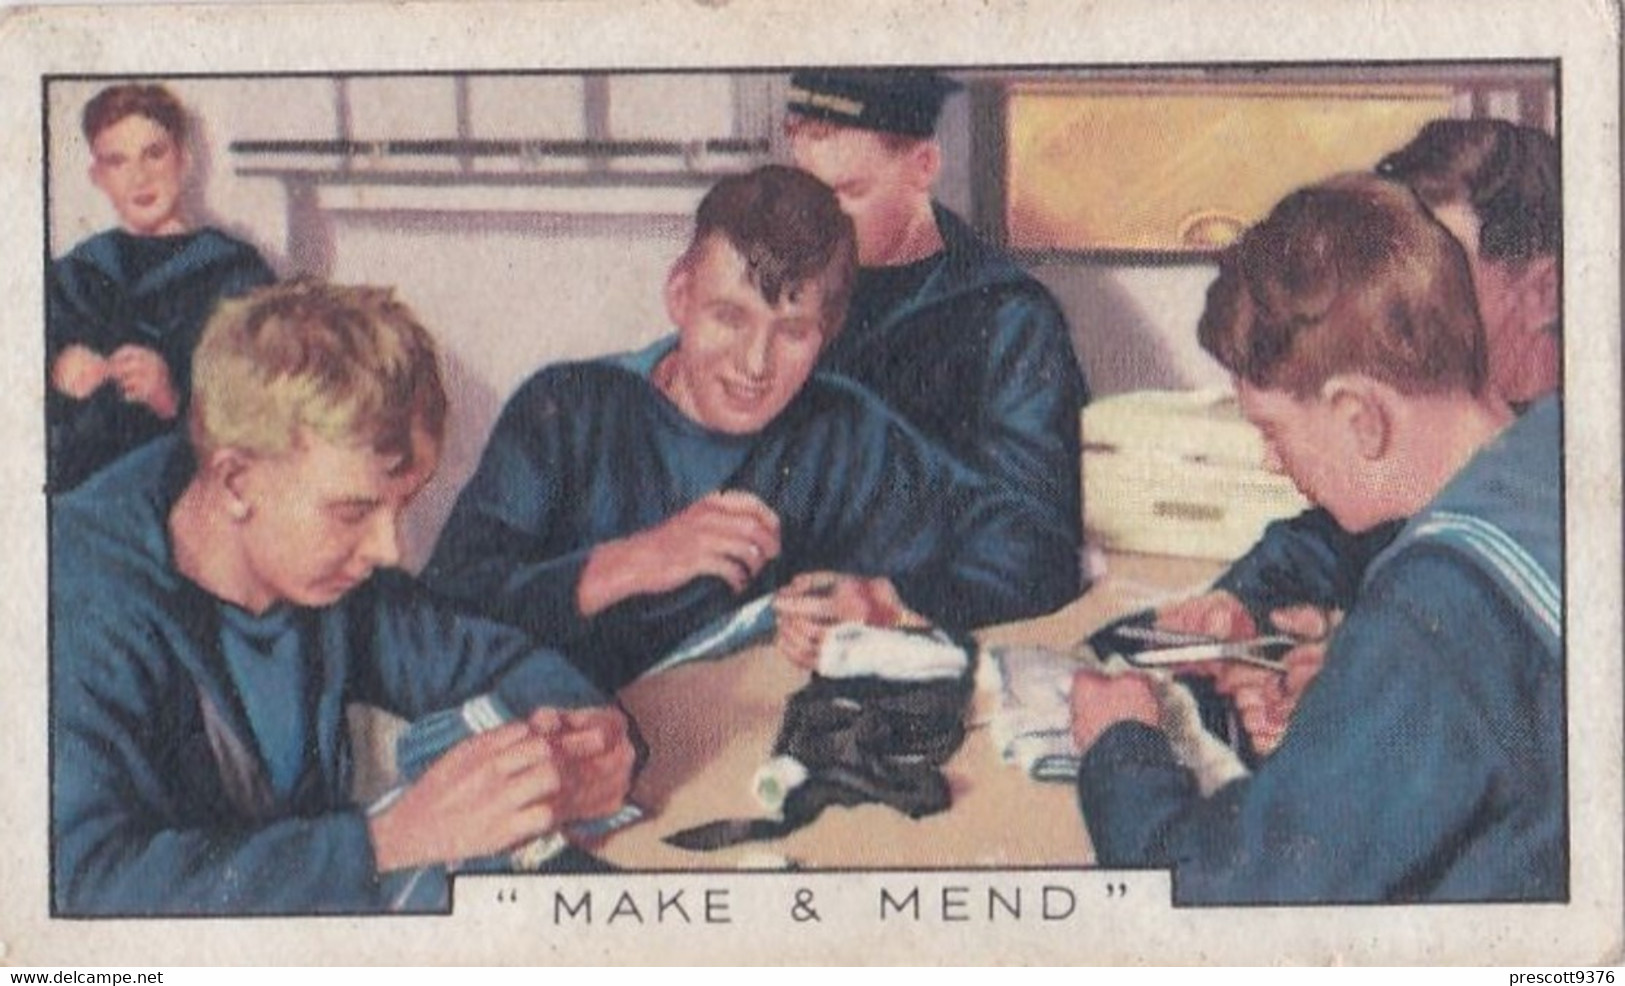 The Navy 1937 - 13 Make & Mend  - Gallaher Cigarette Card - Original - Military - Gallaher